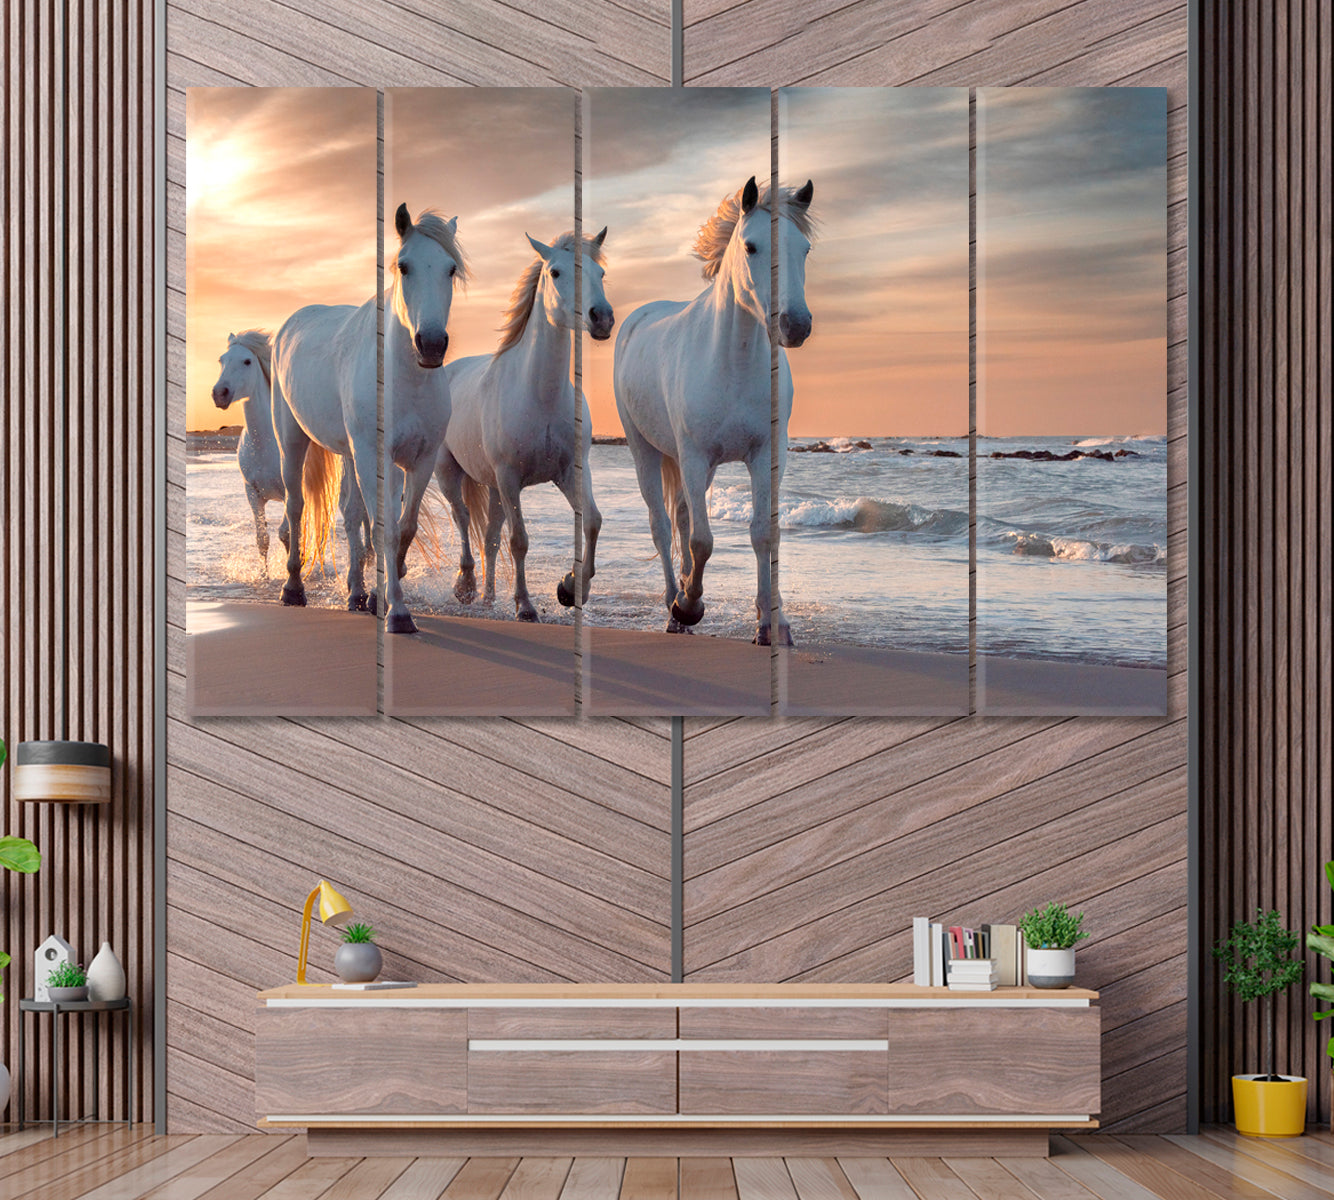 Herd of White Horses on Mediterranean Coast Camargue France Canvas Print ArtLexy 5 Panels 36"x24" inches 